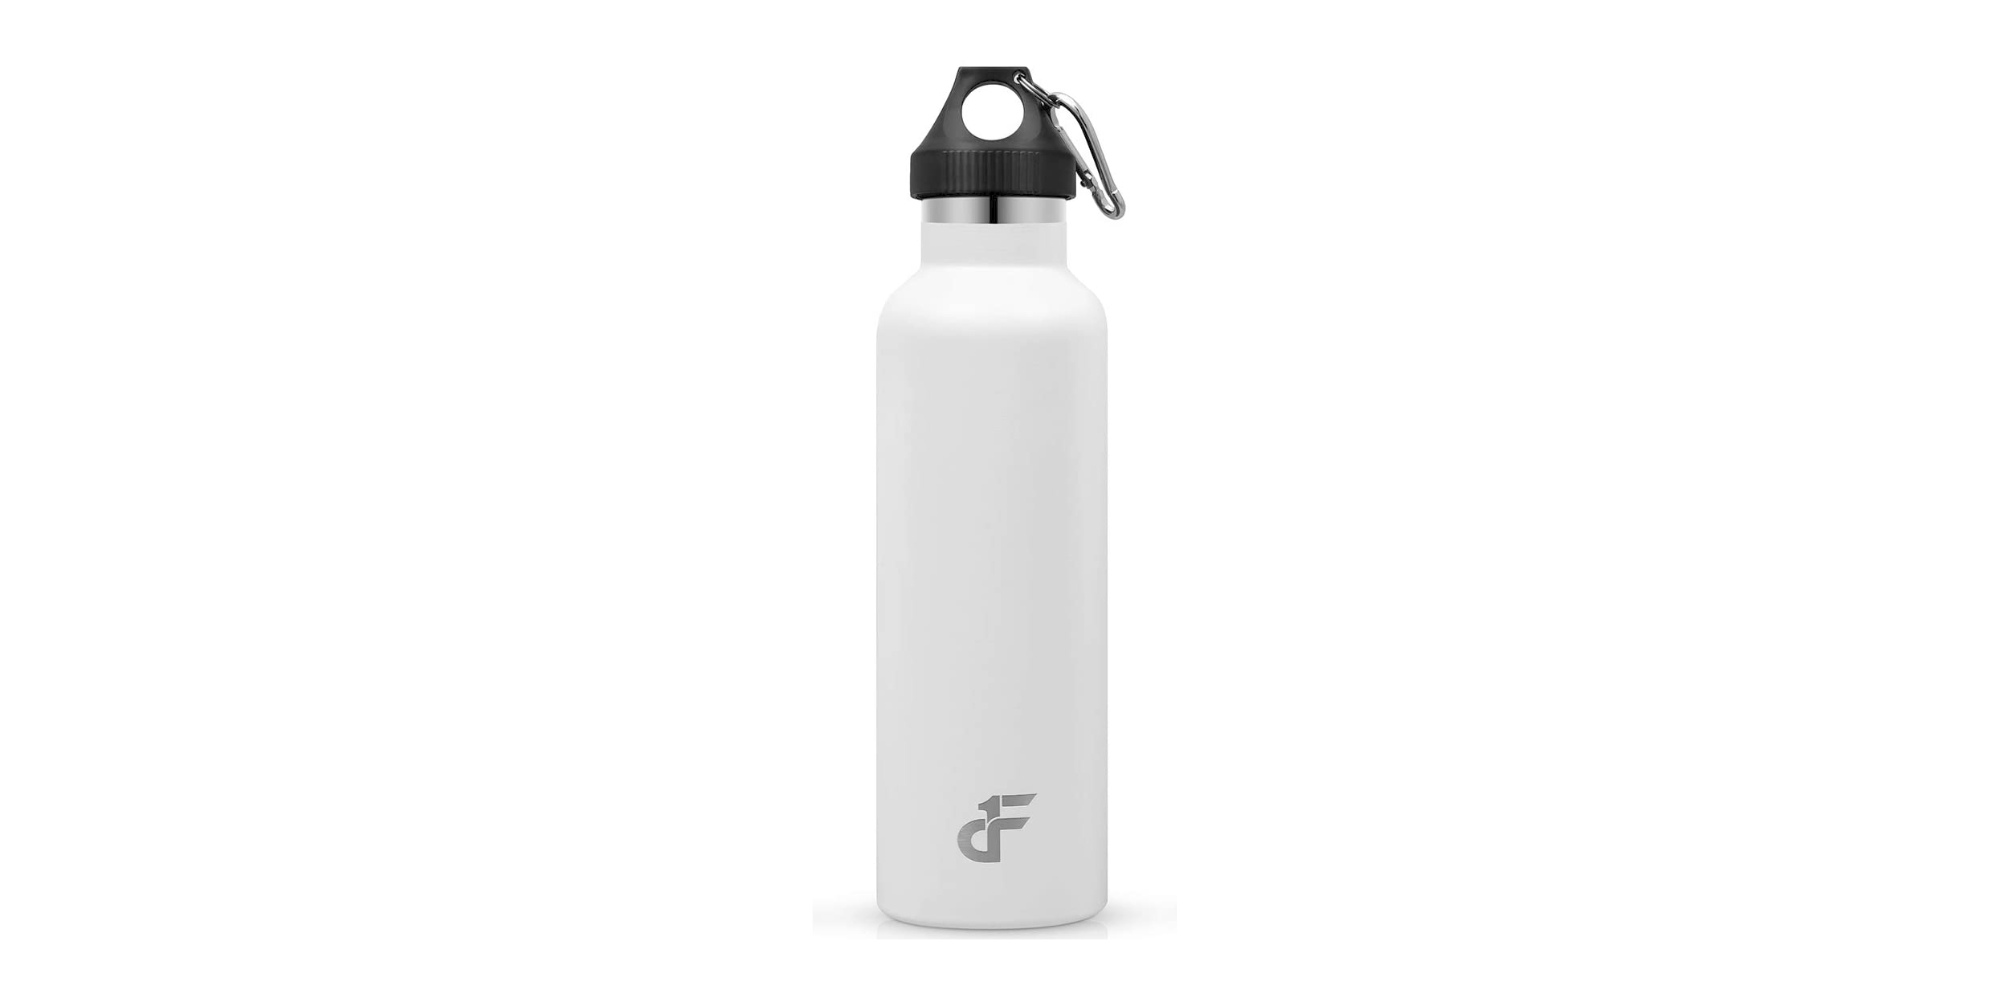 https://9to5toys.com/wp-content/uploads/sites/5/2021/04/Day-1-Fitness-Stainless-Steel-24-ounce-Water-Bottle.jpg